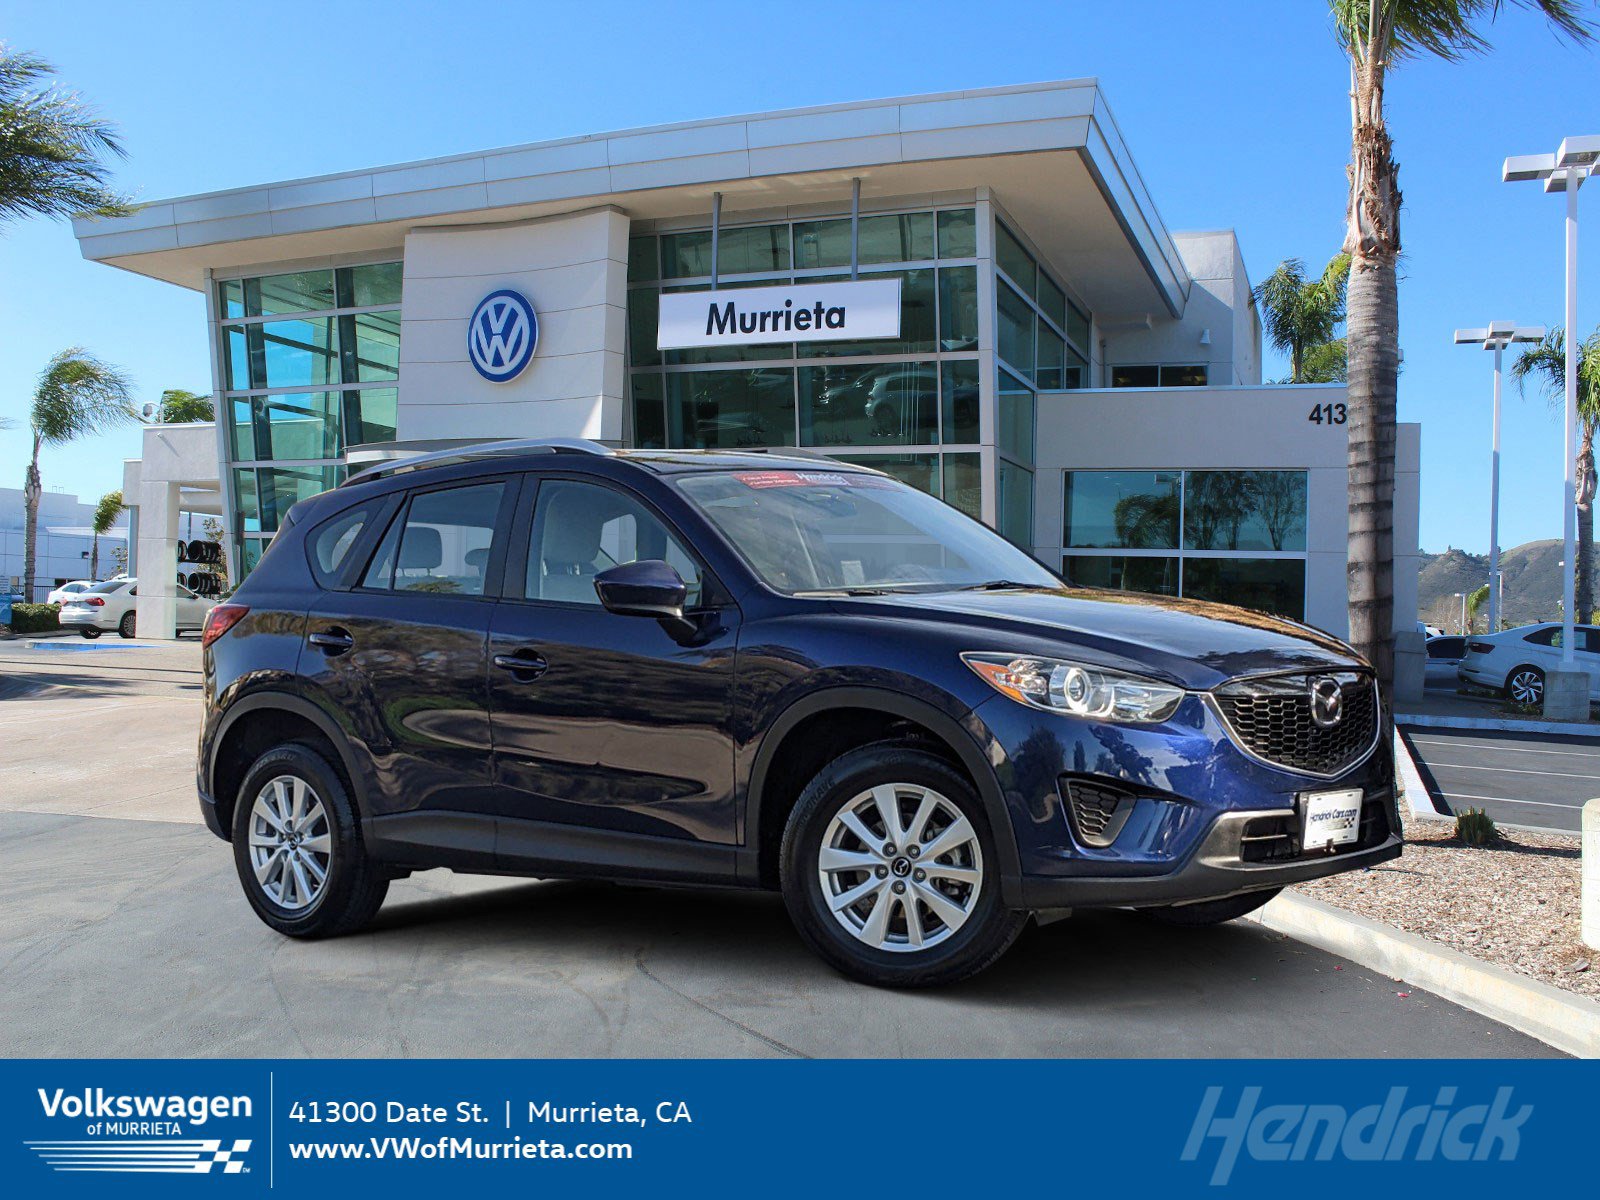 Used 2014 MAZDA CX-5 for Sale Right Now - Autotrader